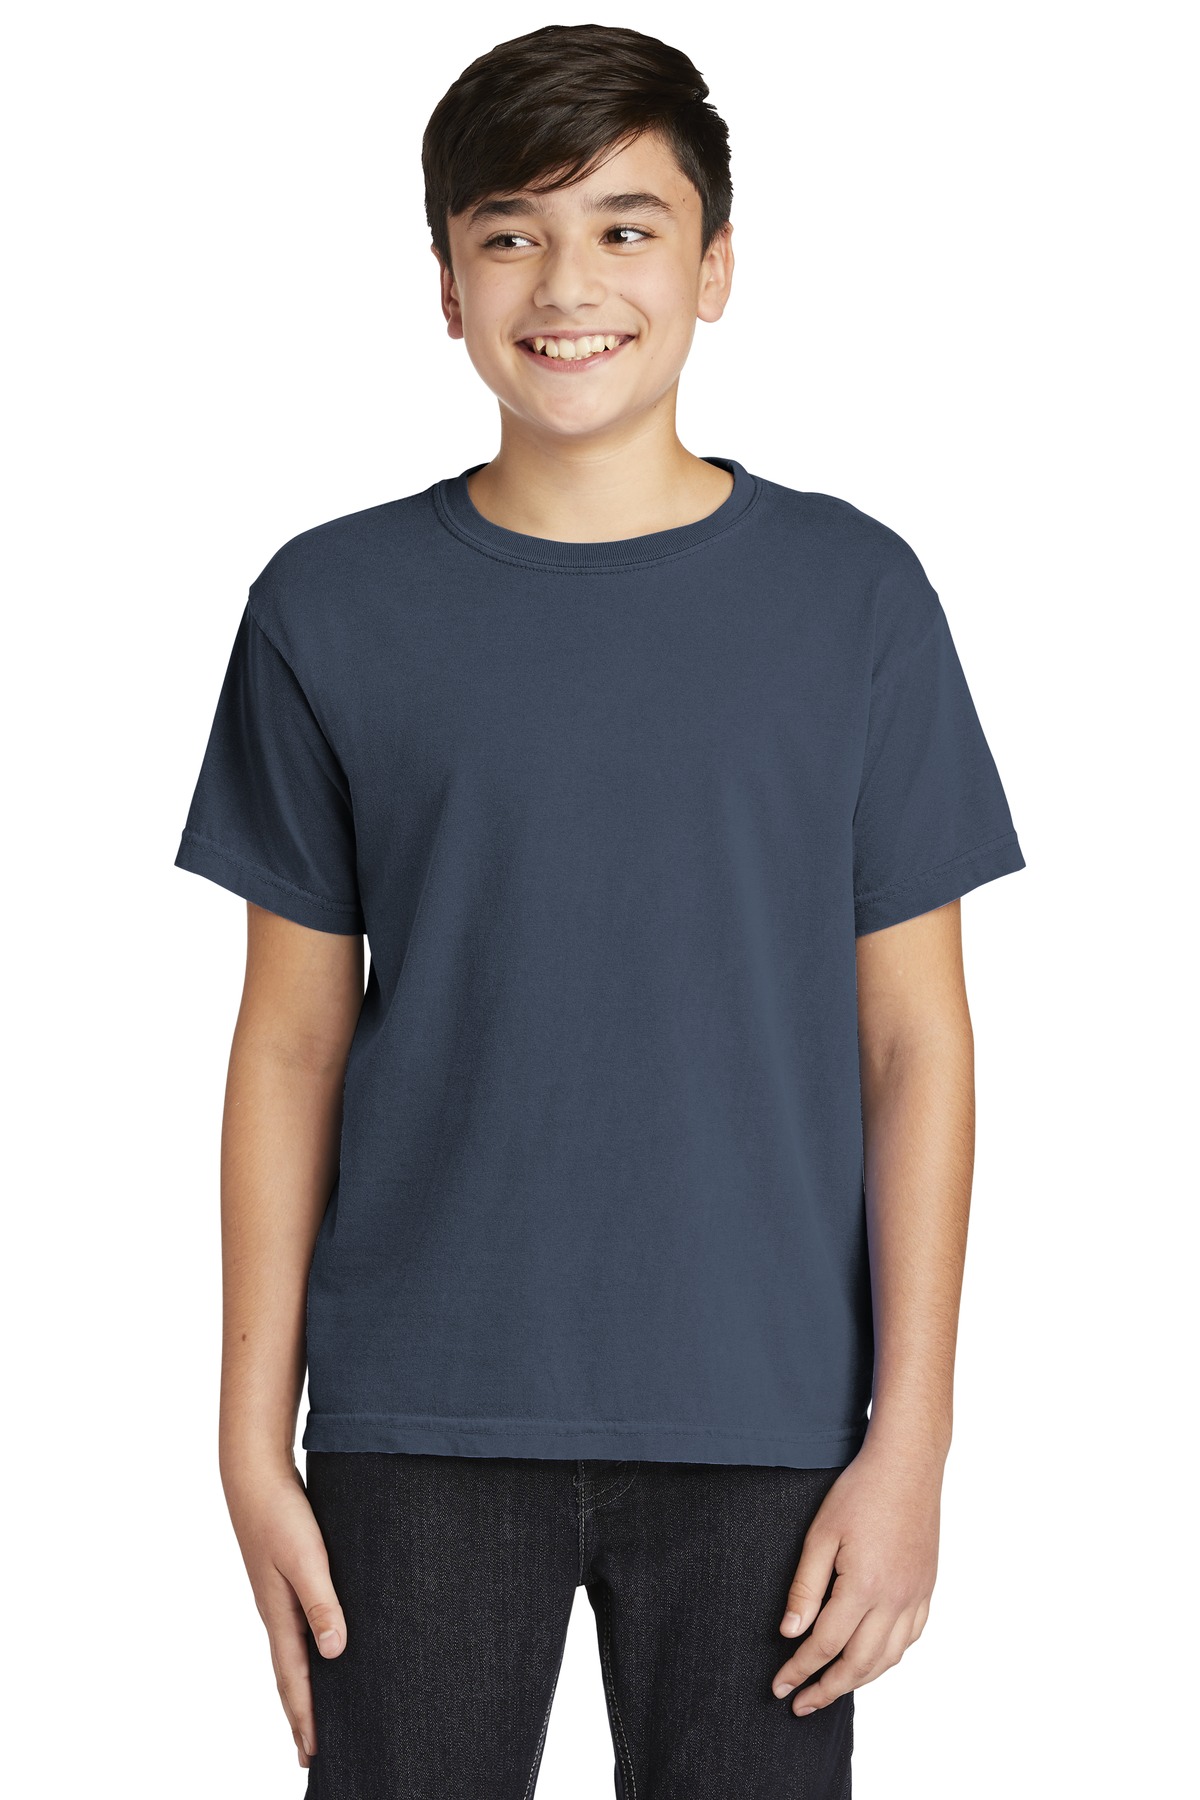 COMFORT COLORS Youth Heavyweight Ring Spun Tee. 9018